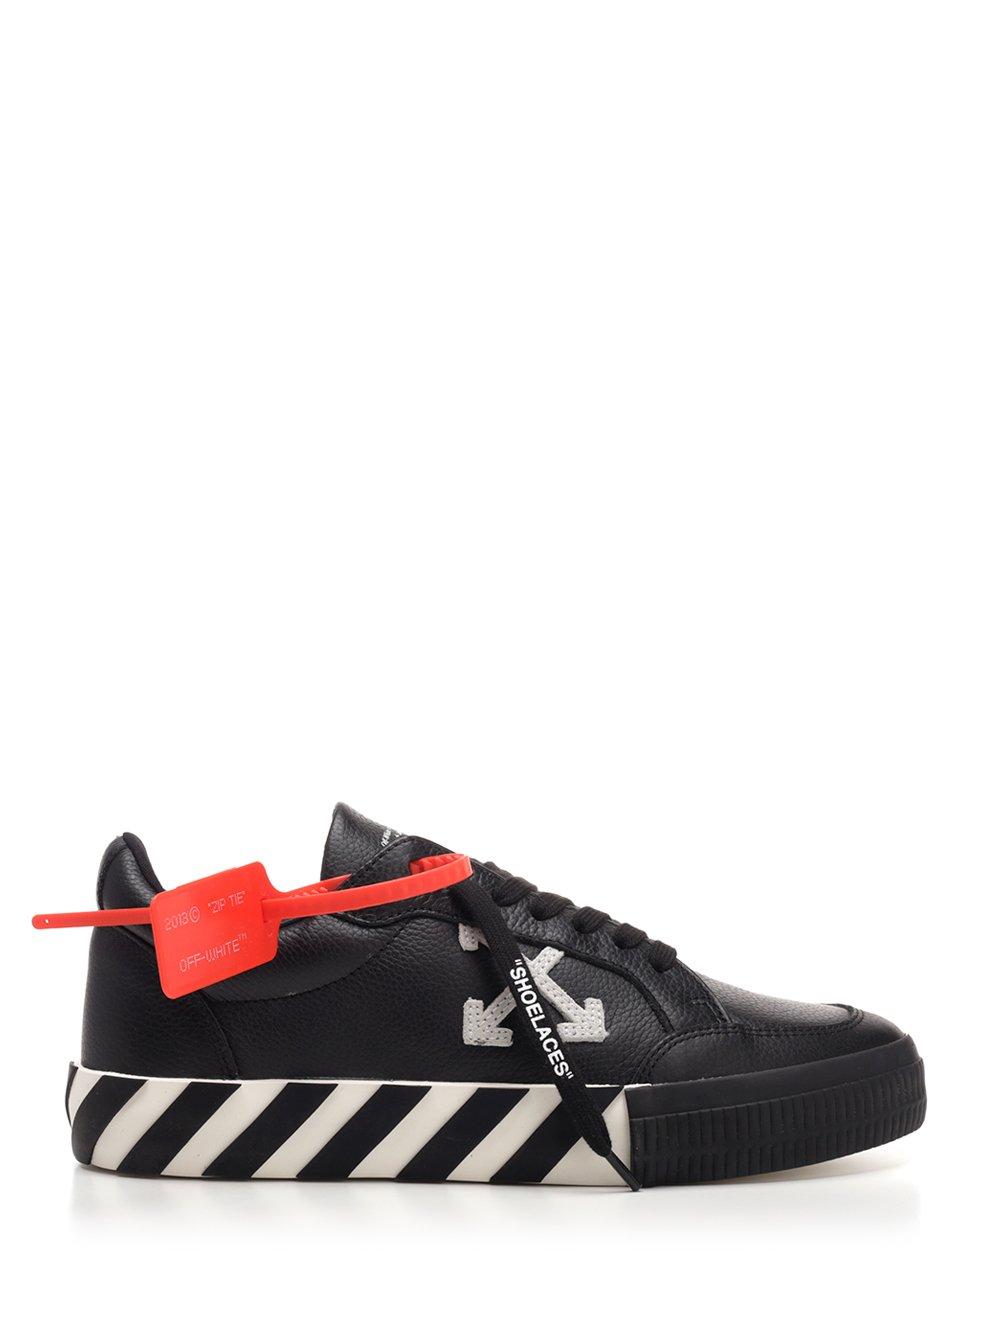 Off-White c/o Virgil Abloh Leather Vulcanized Low-top Sneakers in Black ...